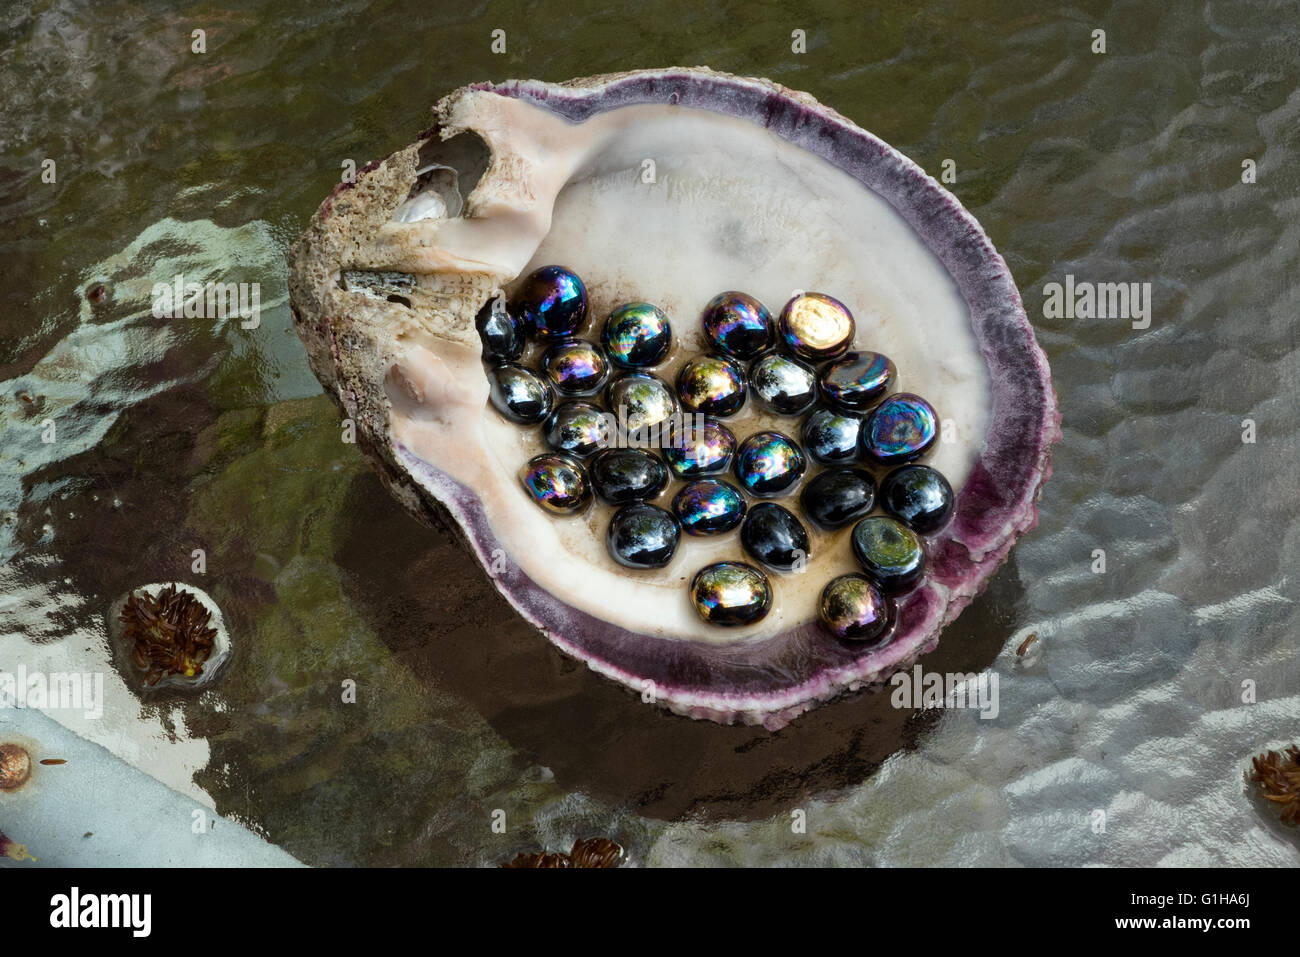 Shell holding glass beads. Stock Photo